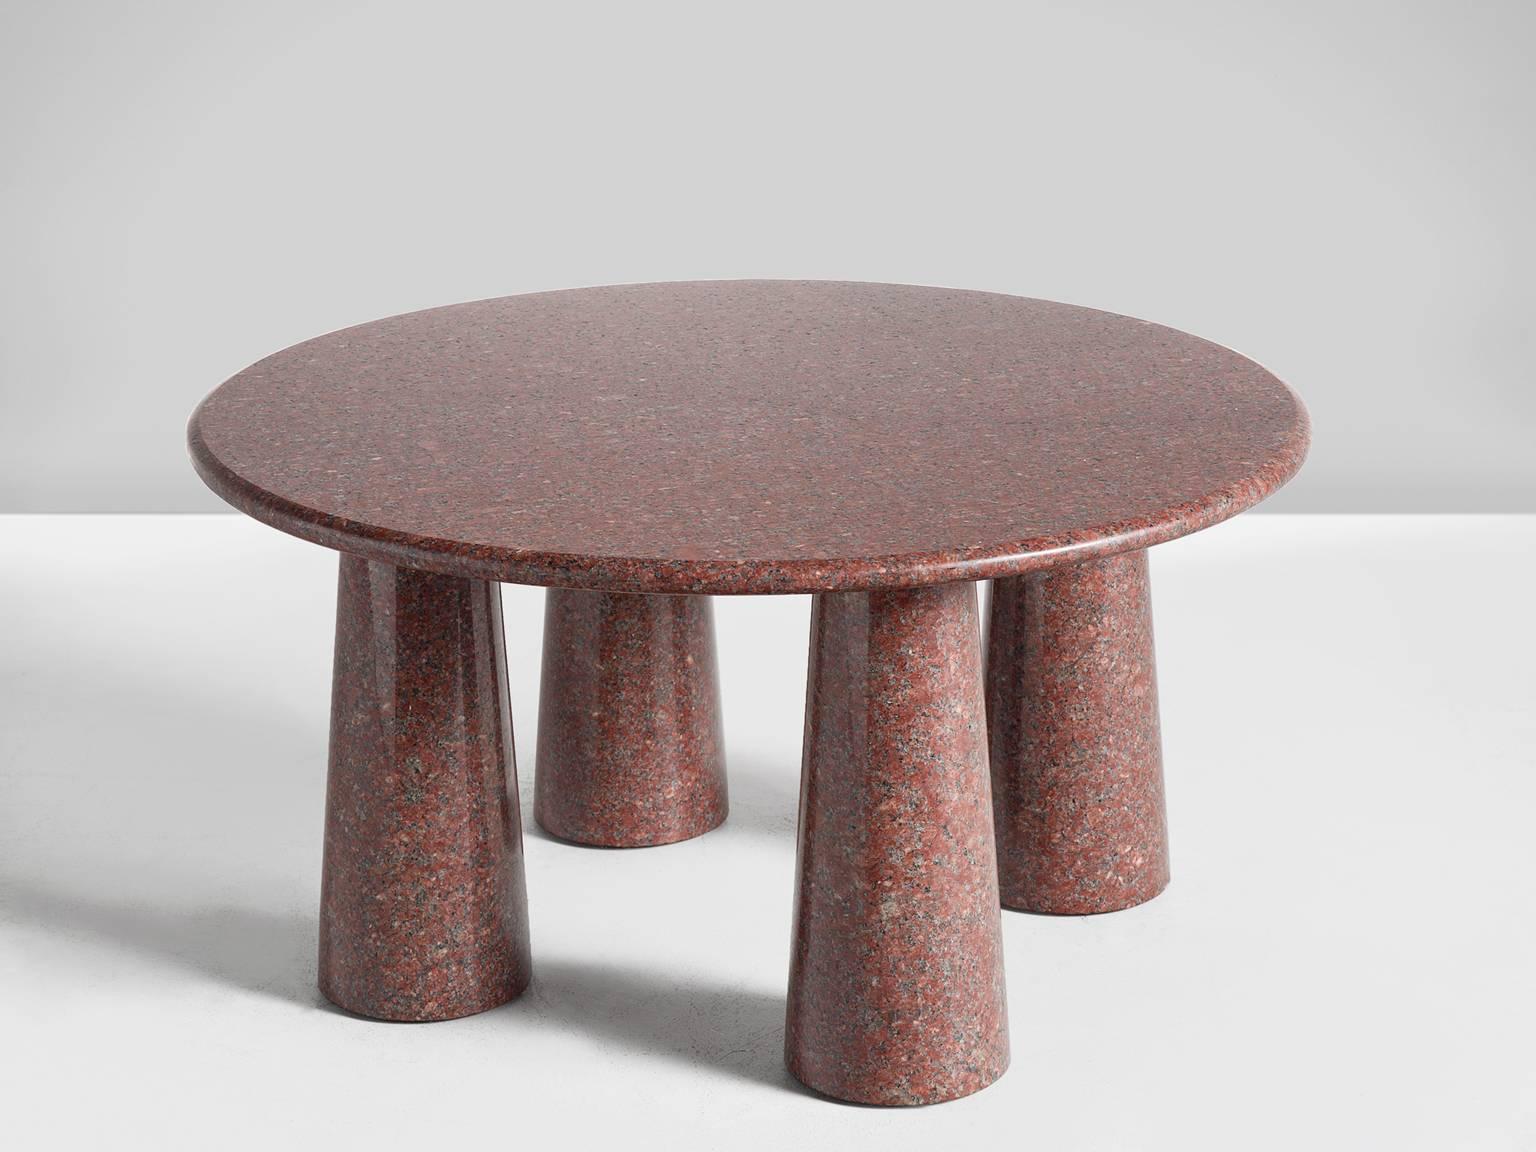 Circular red cocktail table, granite, 1970s, Italy

This small but solid table has a strong architectural features such as cone shaped legs. The circular top is small in comparison to the legs, giving this table a dense and strong look despite its